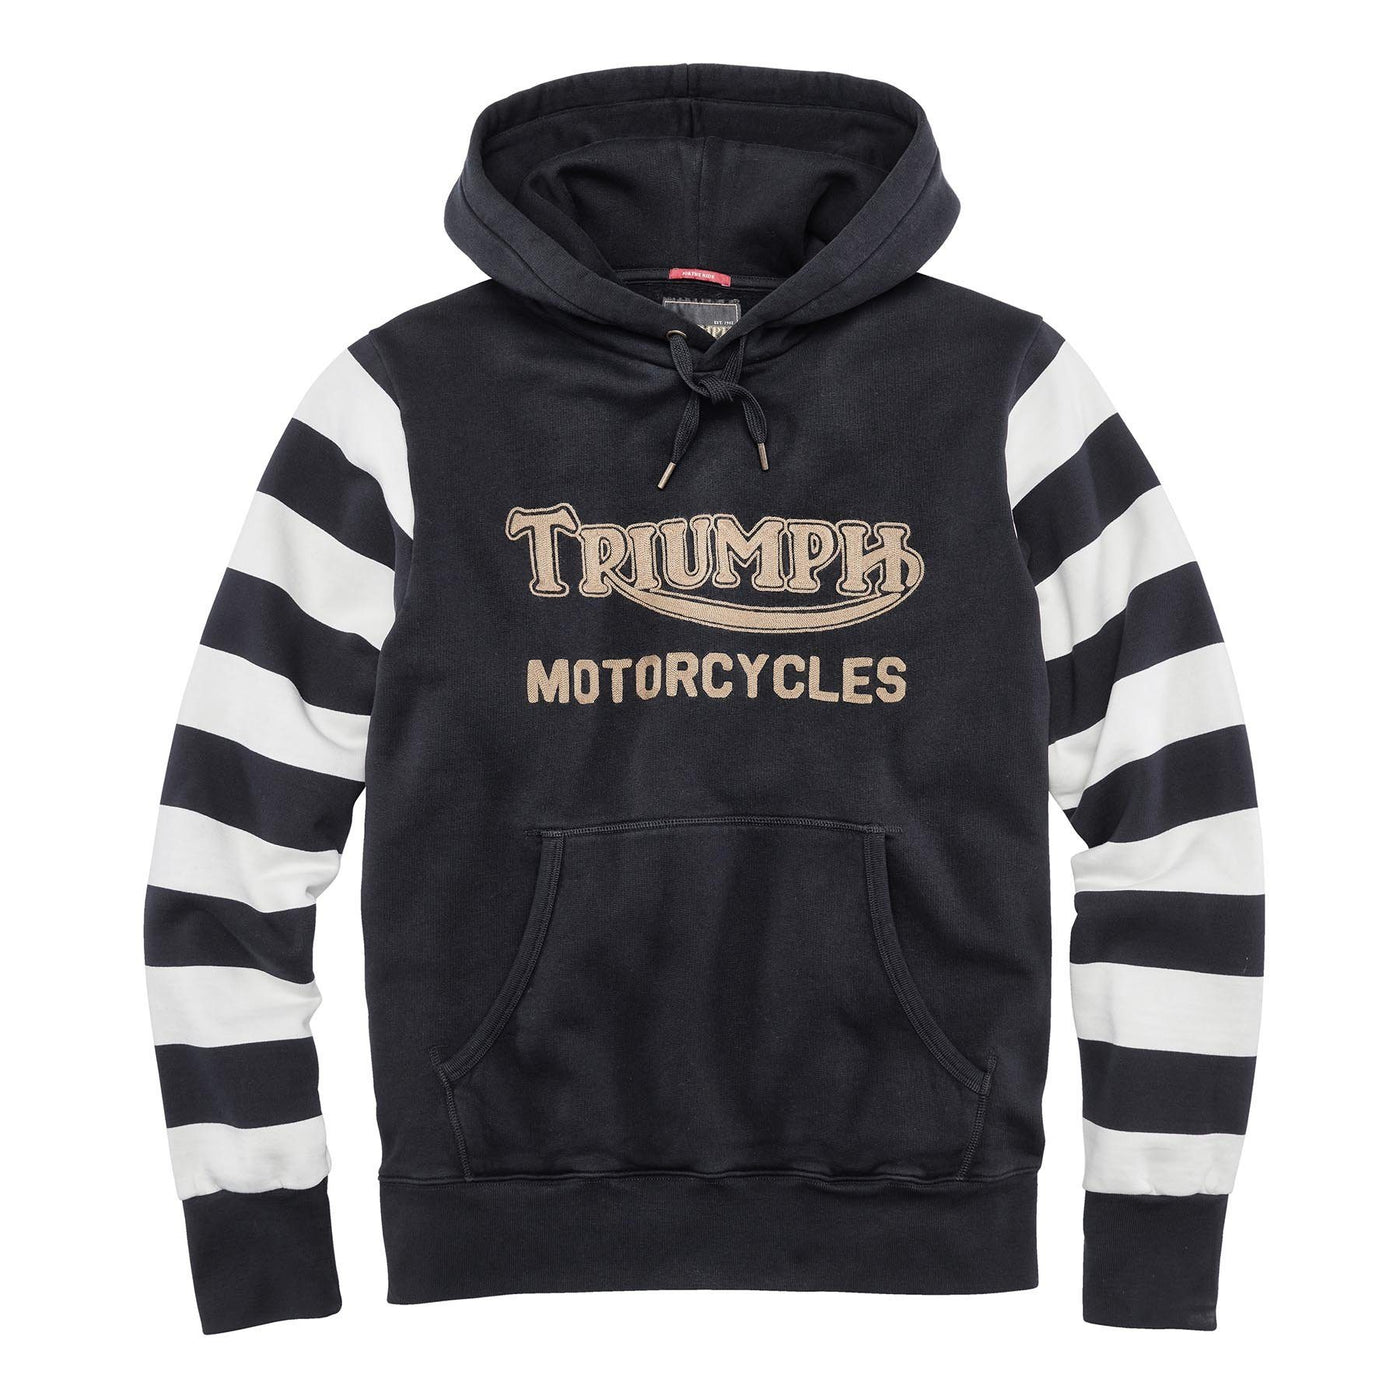 Triumph Motorcycles Sweater Oddstone Triumph Motorcycles 